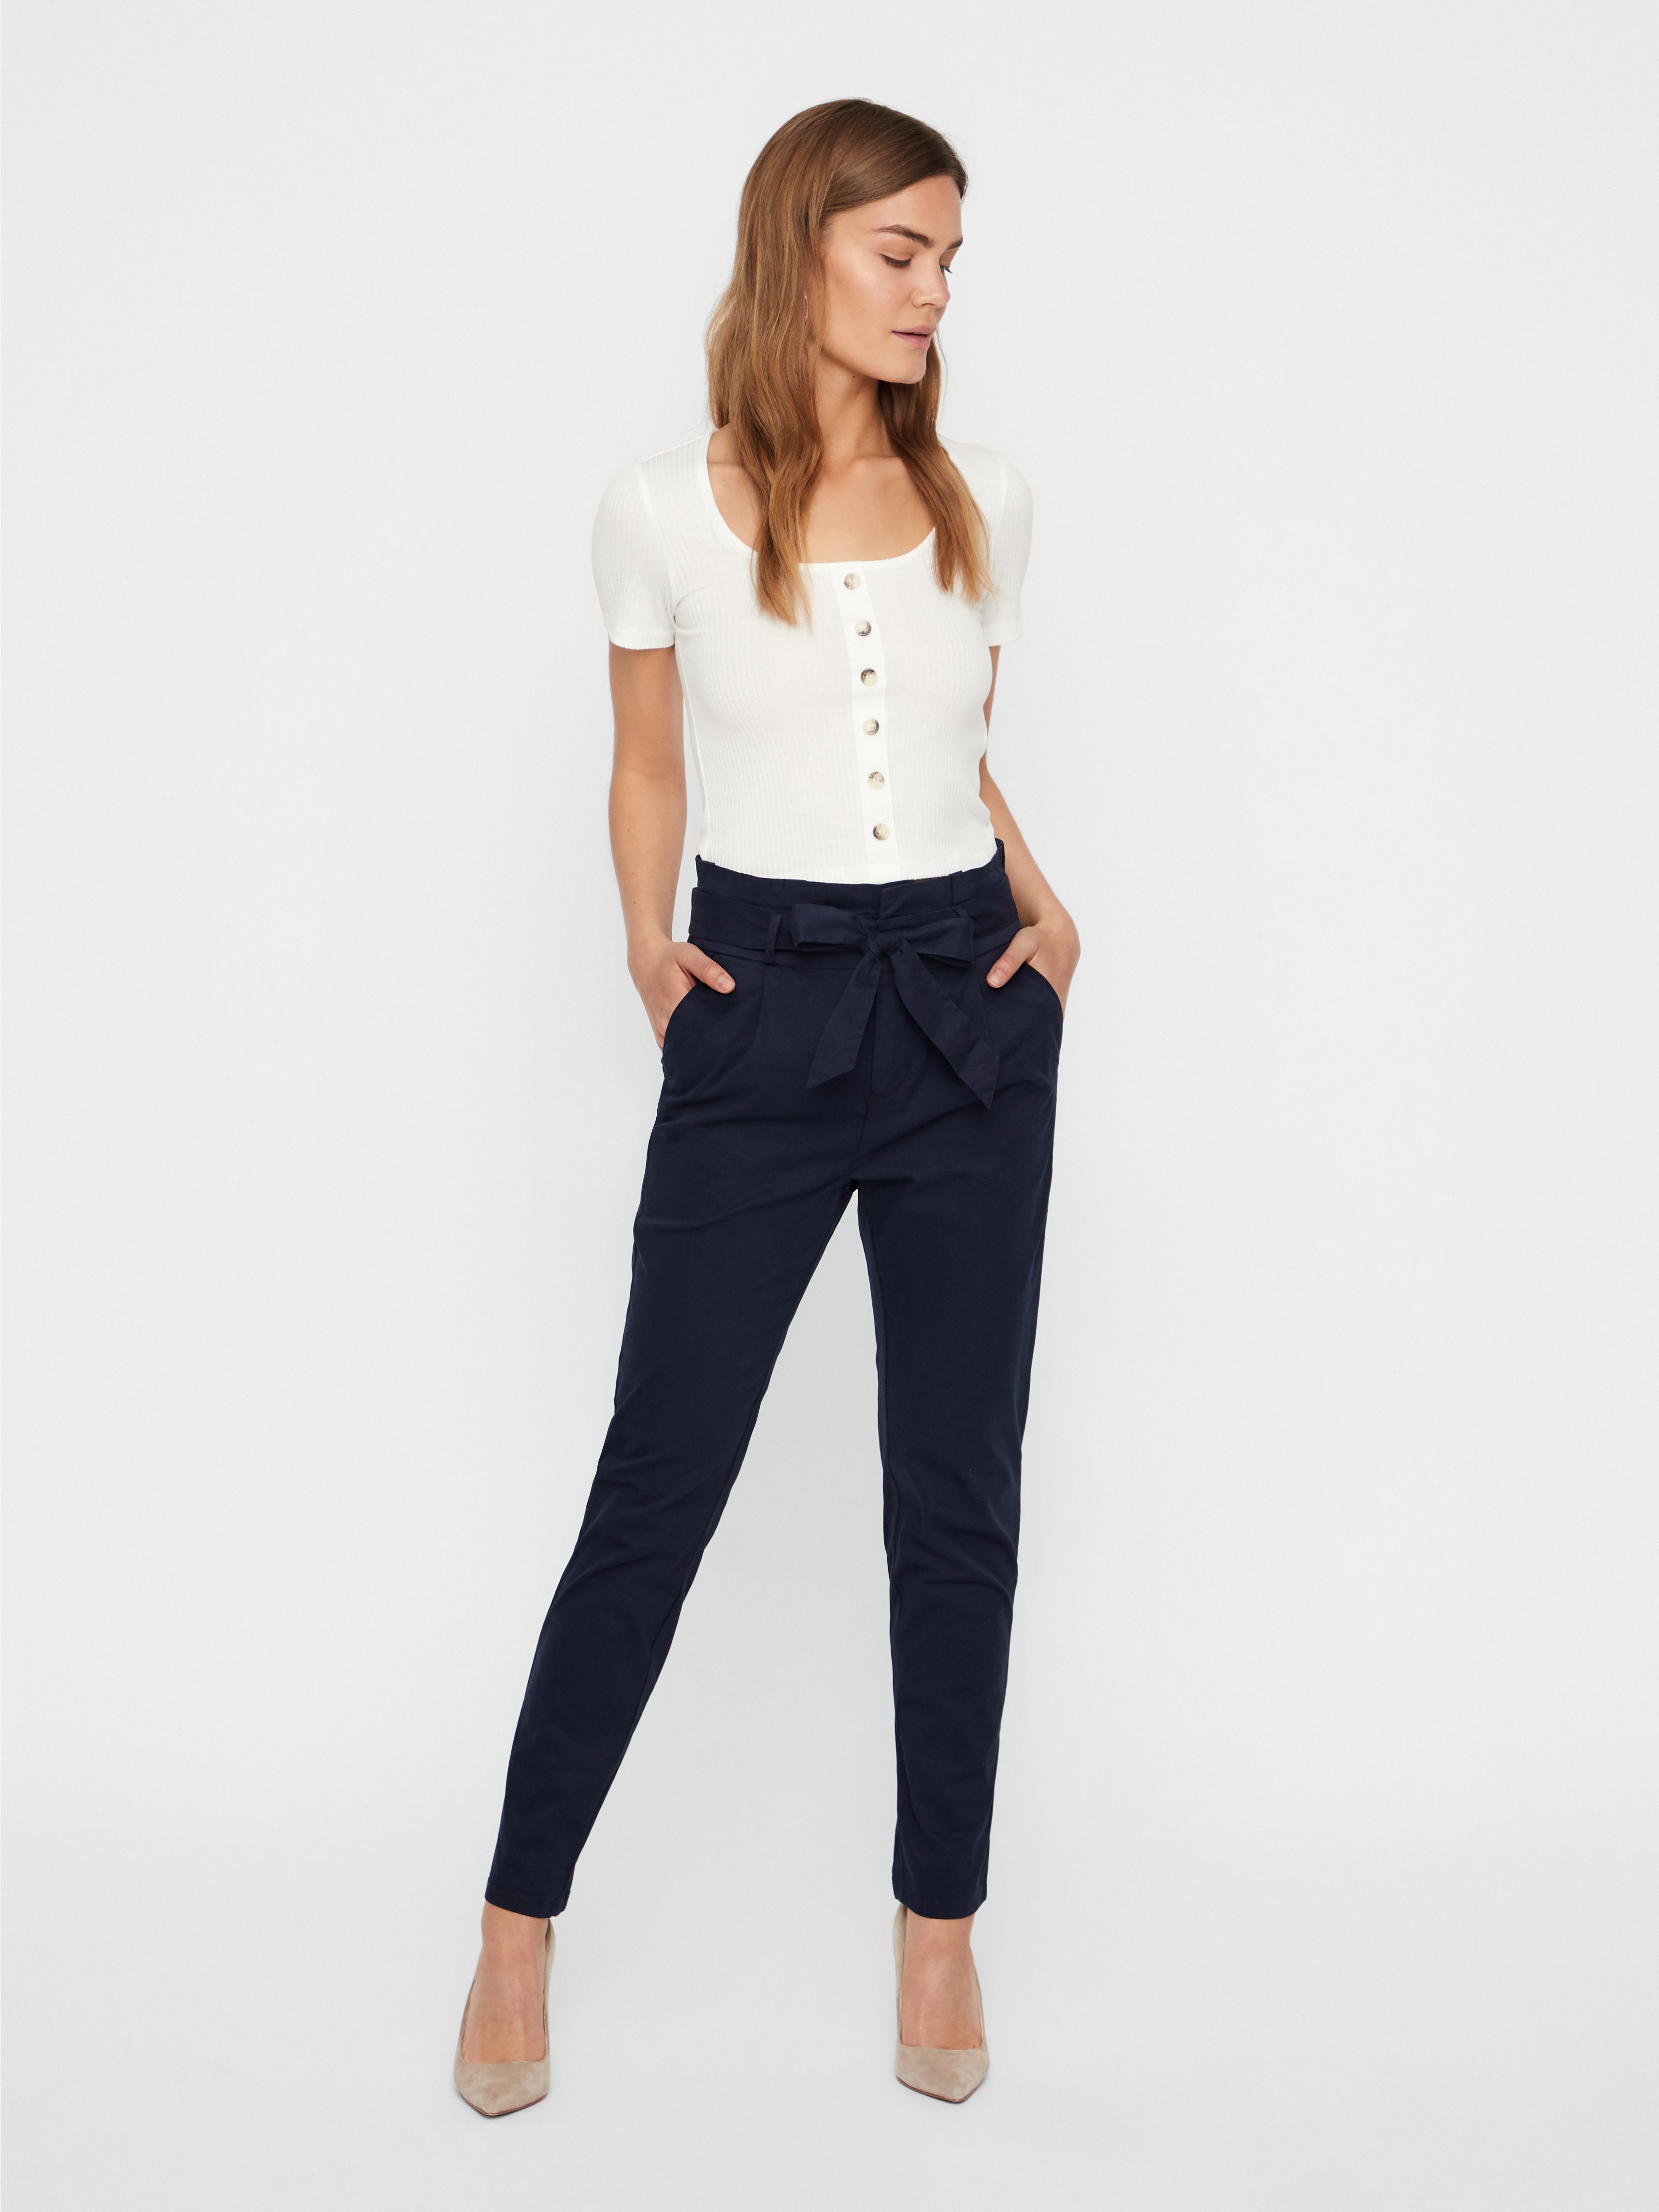 Buy Aswinfon Womens Trousers Linen Pants Elastic Waist Casual Cropped Loose  Fit Trouser Ladies with Pockets Online at desertcartINDIA